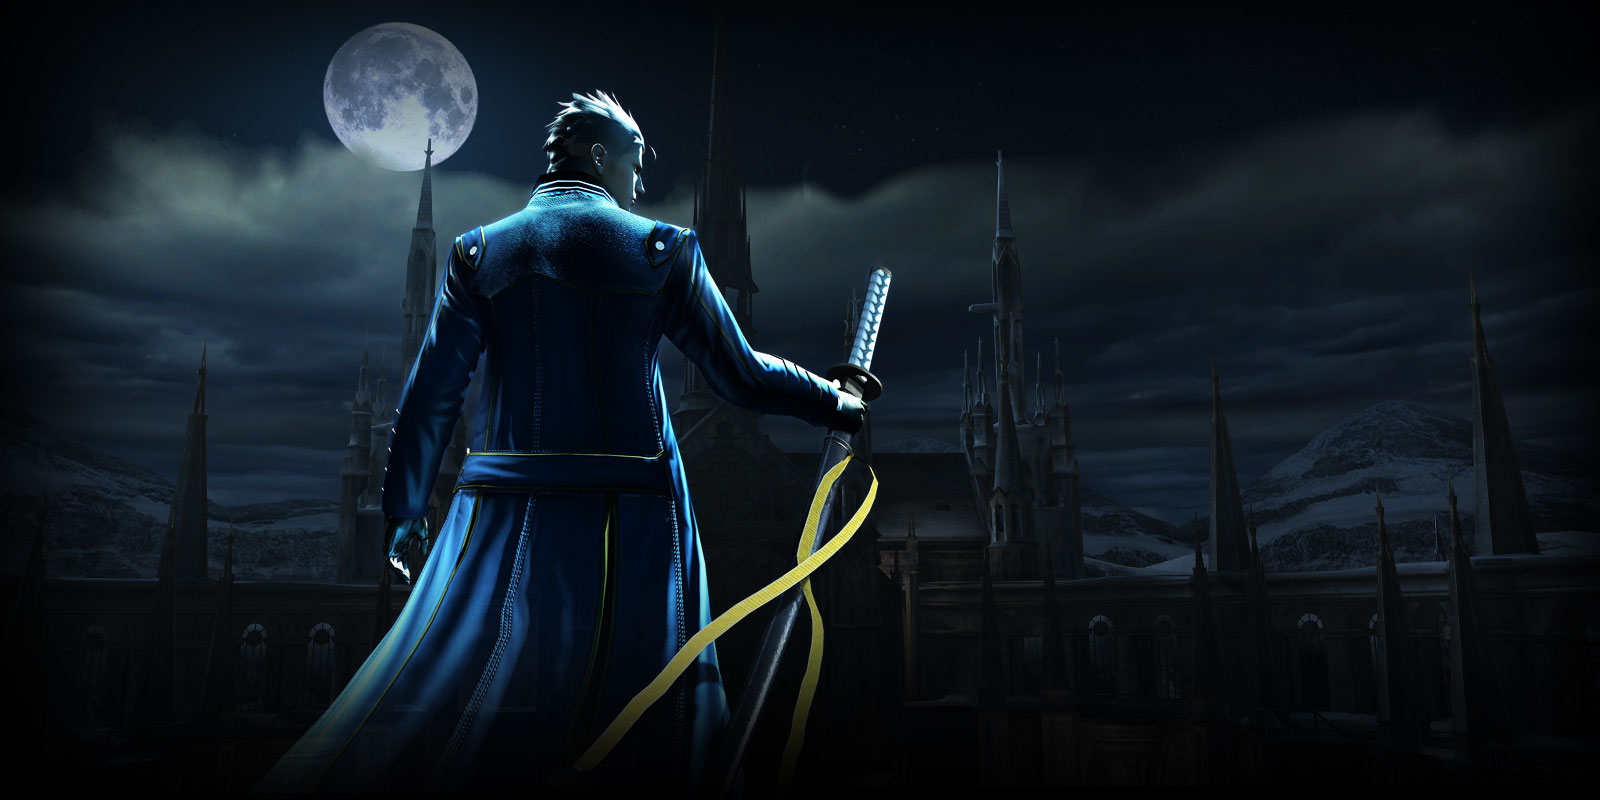 Devil May Cry Vergil Wallpaper Group